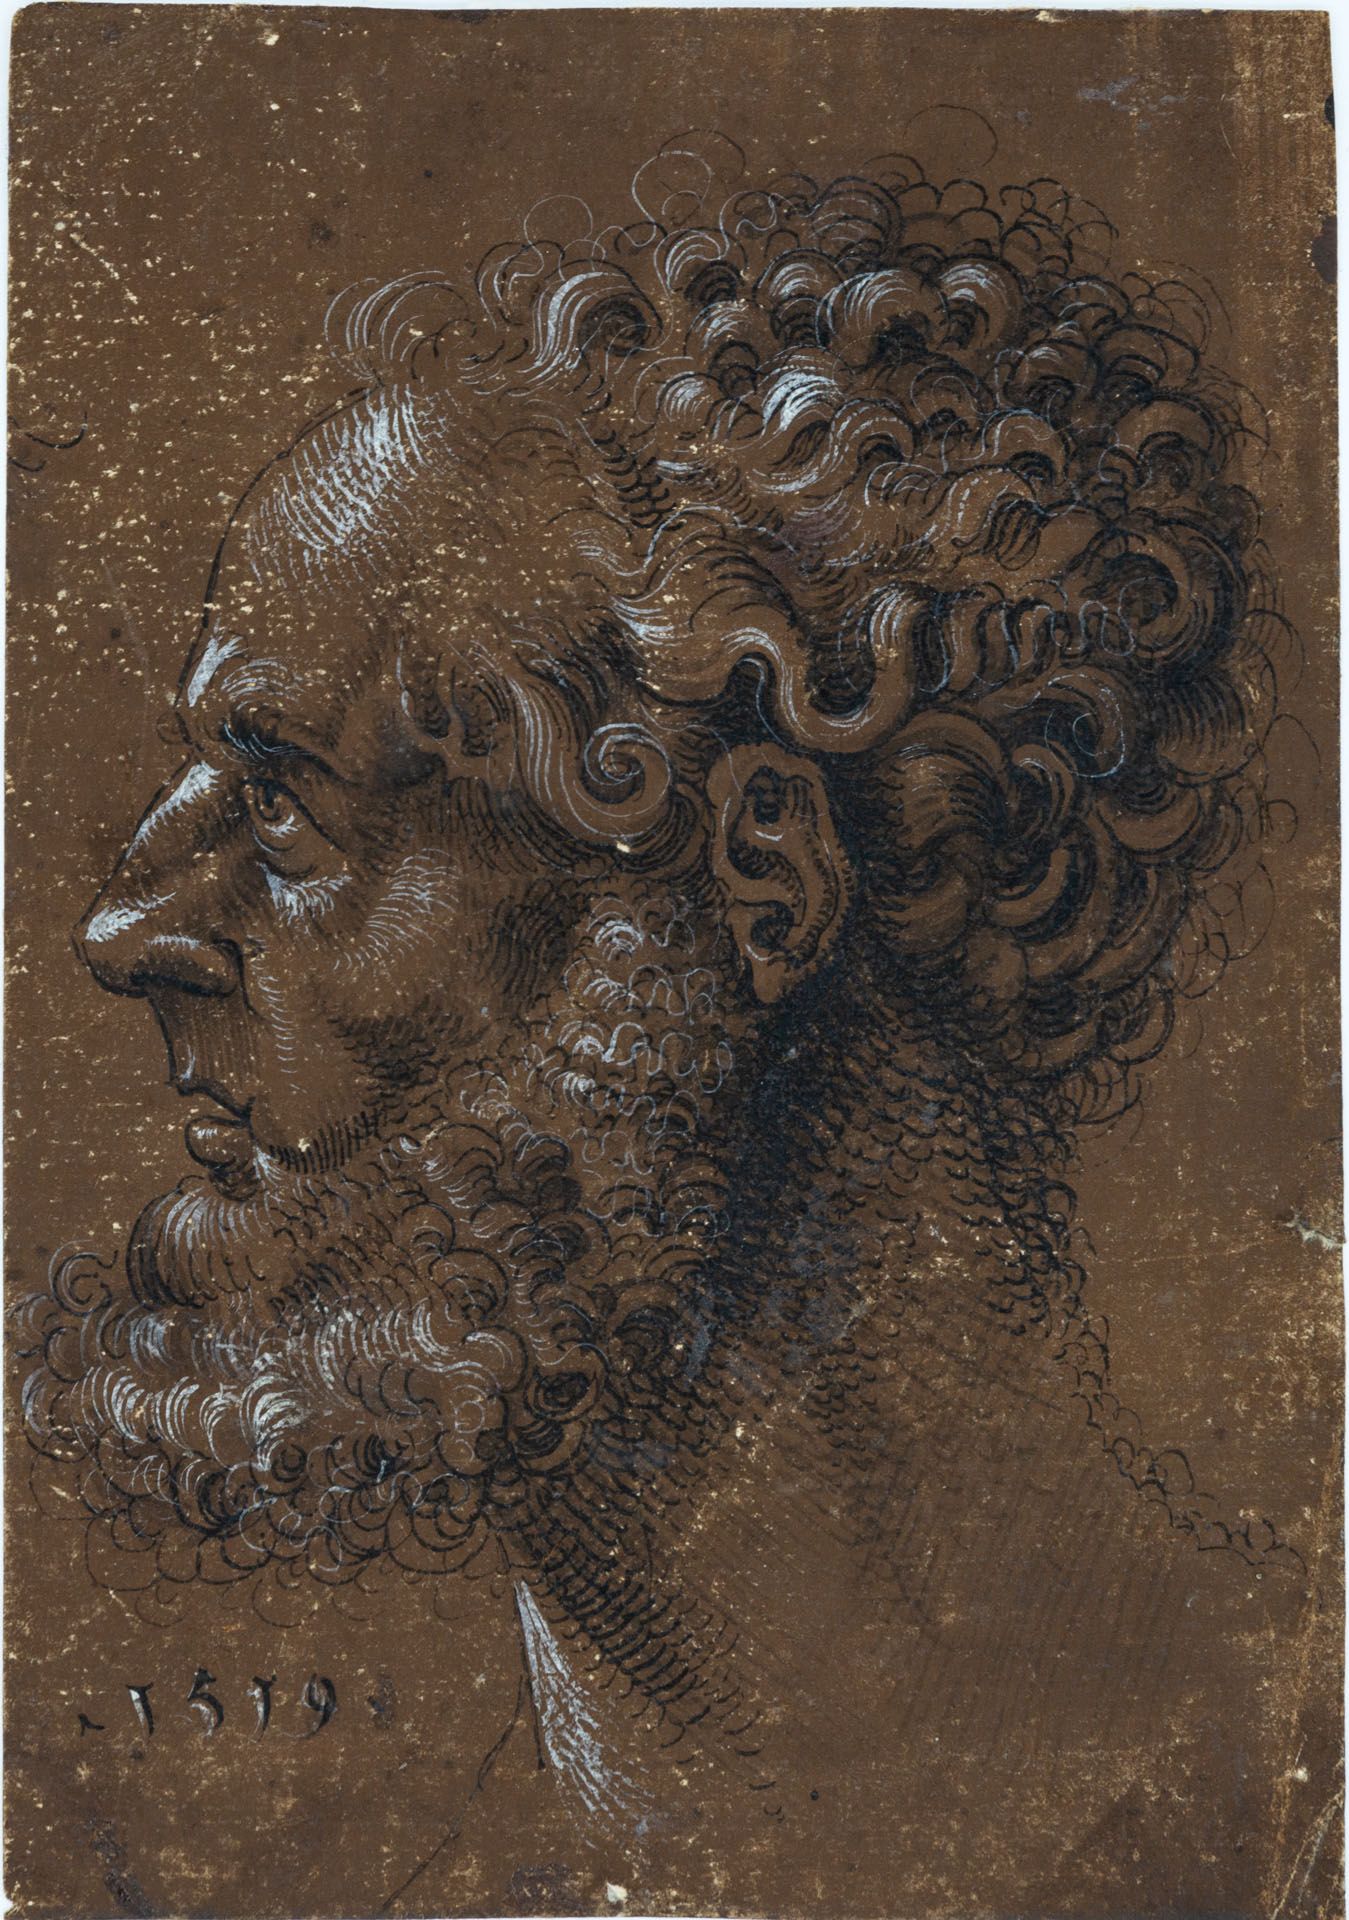 Hans Baldung Called Grien (1484-1545), Head of a Bearded Man in Profile